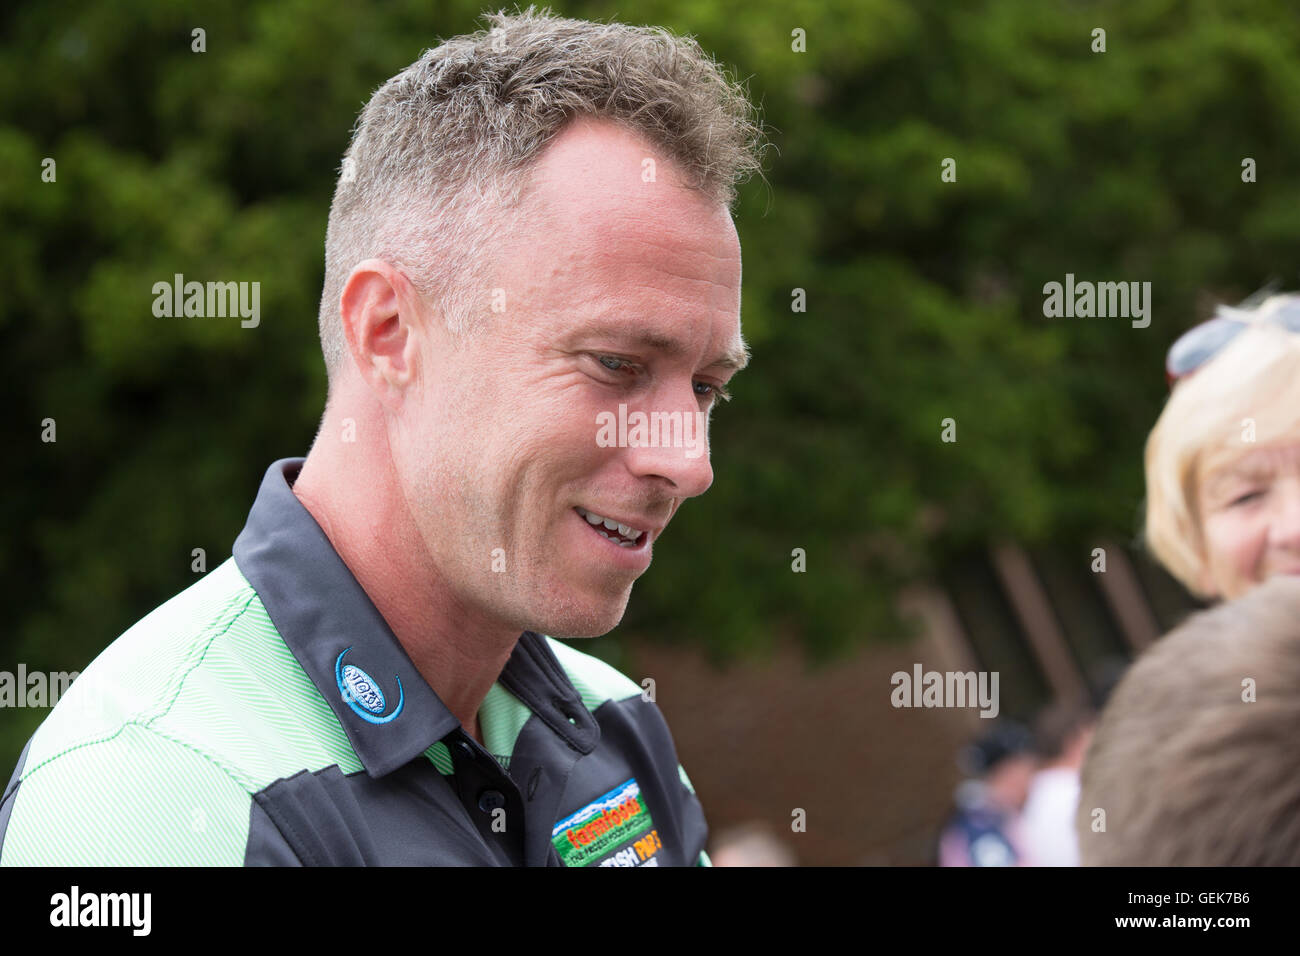 Warwickshire, UK. 26th July, 2016. Farm Foods British Par 3 Championship at Nailcote Hall in Warwickshire. James Jordan signing autographs for the fans. Credit:  steven roe/Alamy Live News Stock Photo